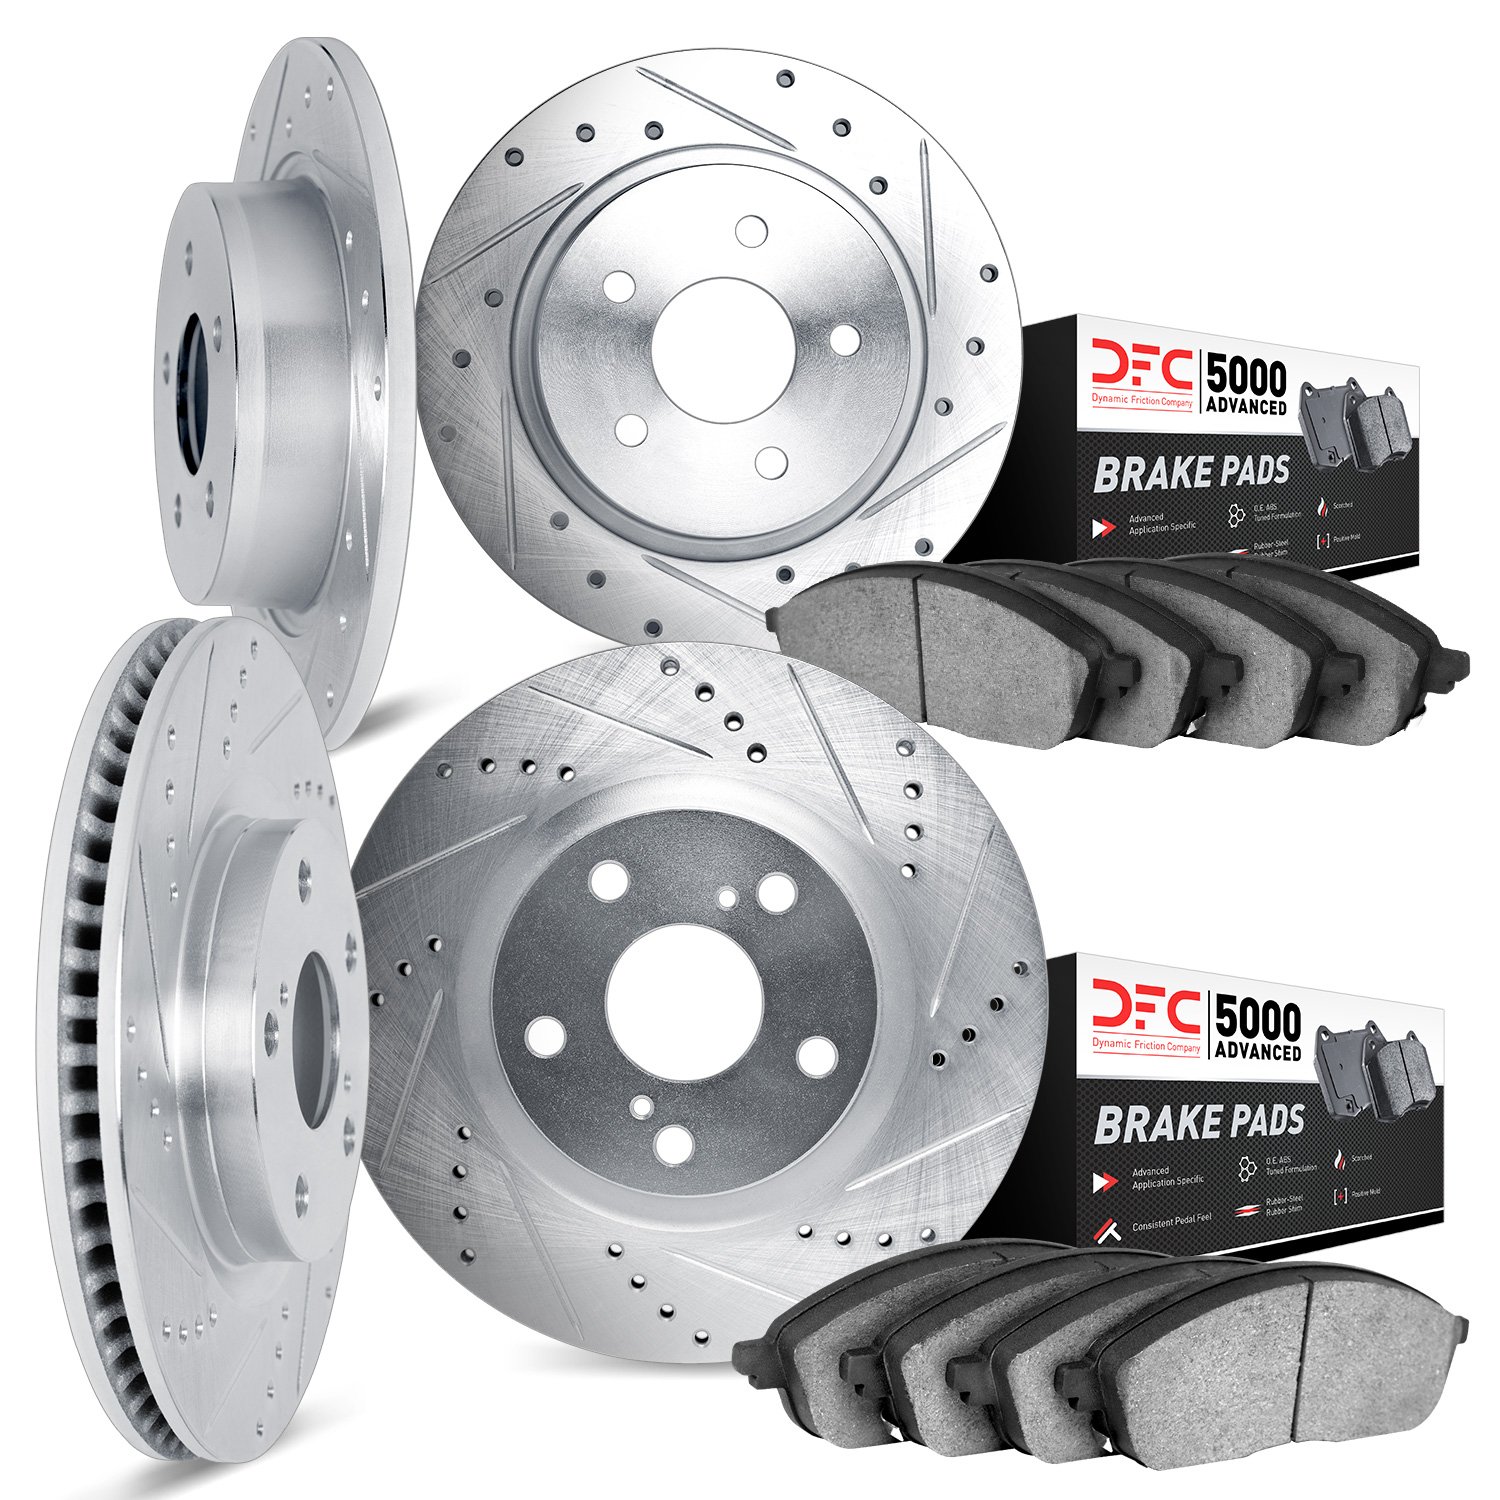 7504-76137 Drilled/Slotted Brake Rotors w/5000 Advanced Brake Pads Kit [Silver], 2002-2006 Lexus/Toyota/Scion, Position: Front a